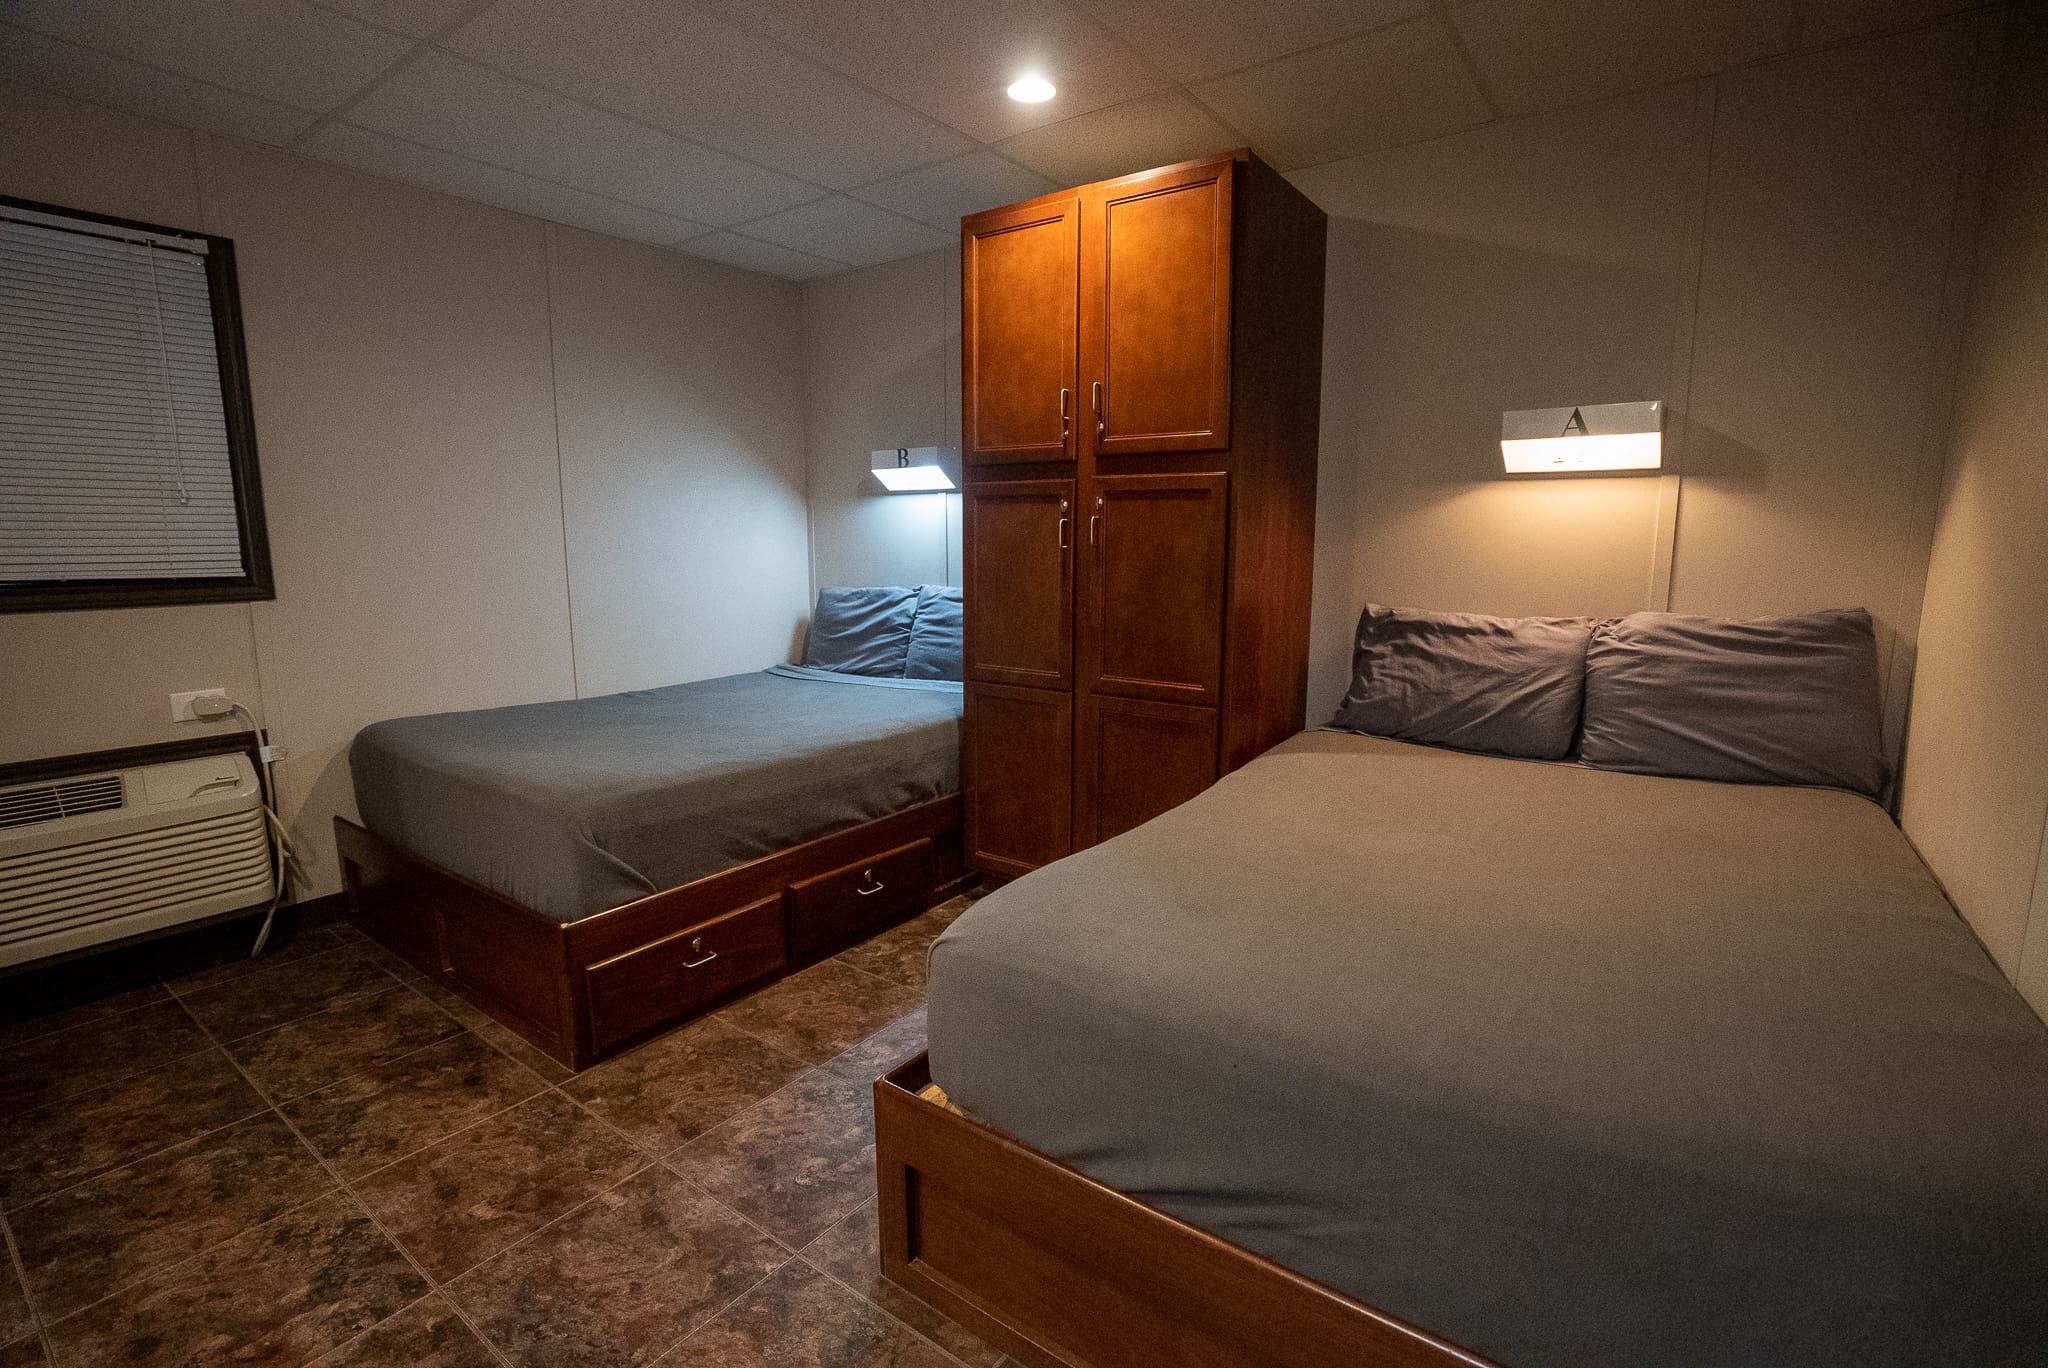 An air conditioned twin-double-room in CHH Pecos with a closet cabinet in between the beds in a tiled floor